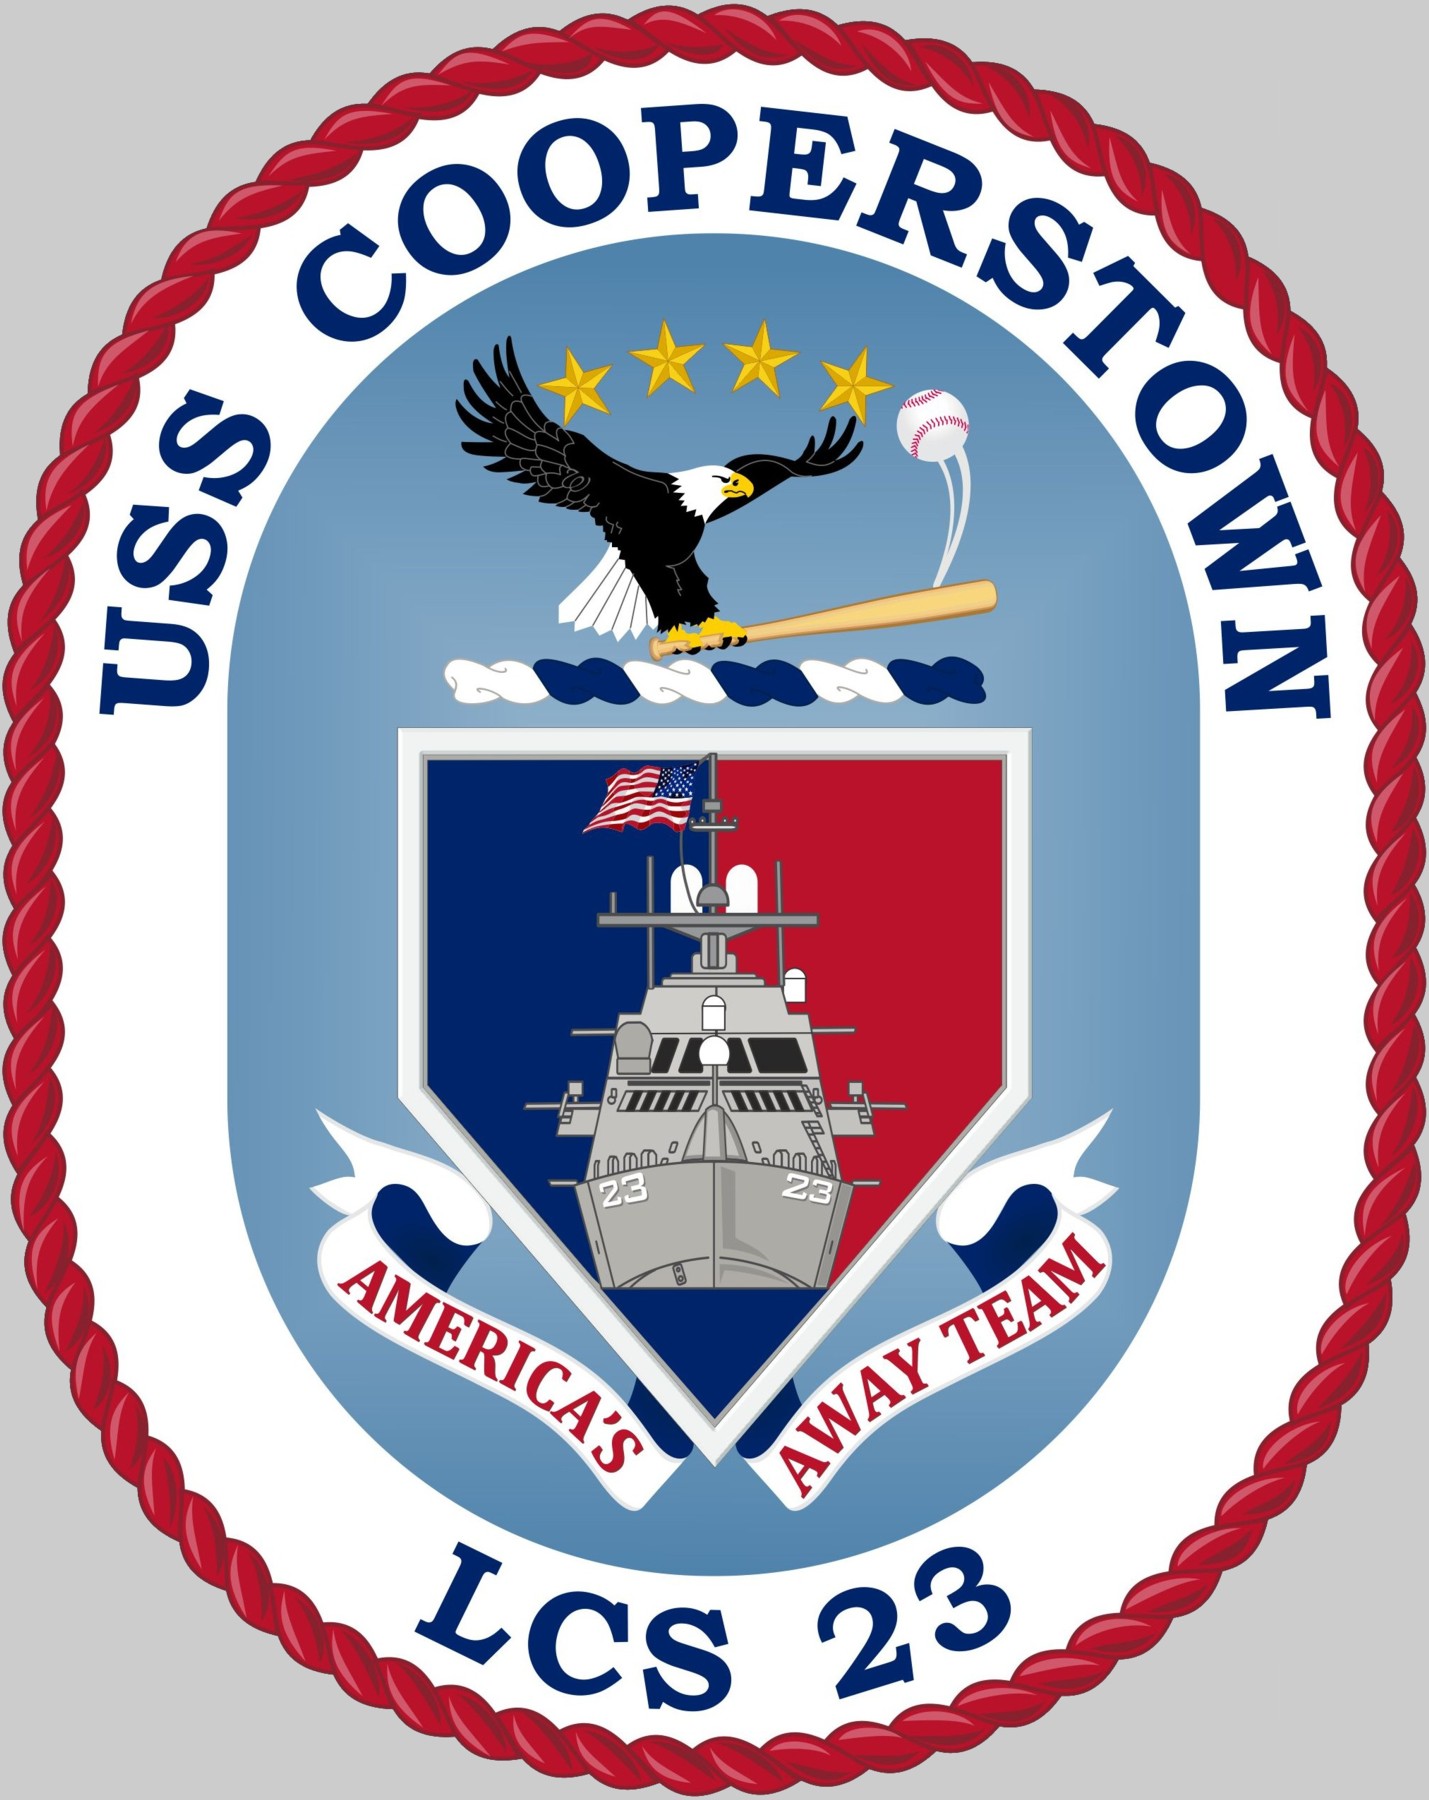 lcs-23 uss cooperstown crest insignia patch badge freedom class littoral combat ship us navy 02c